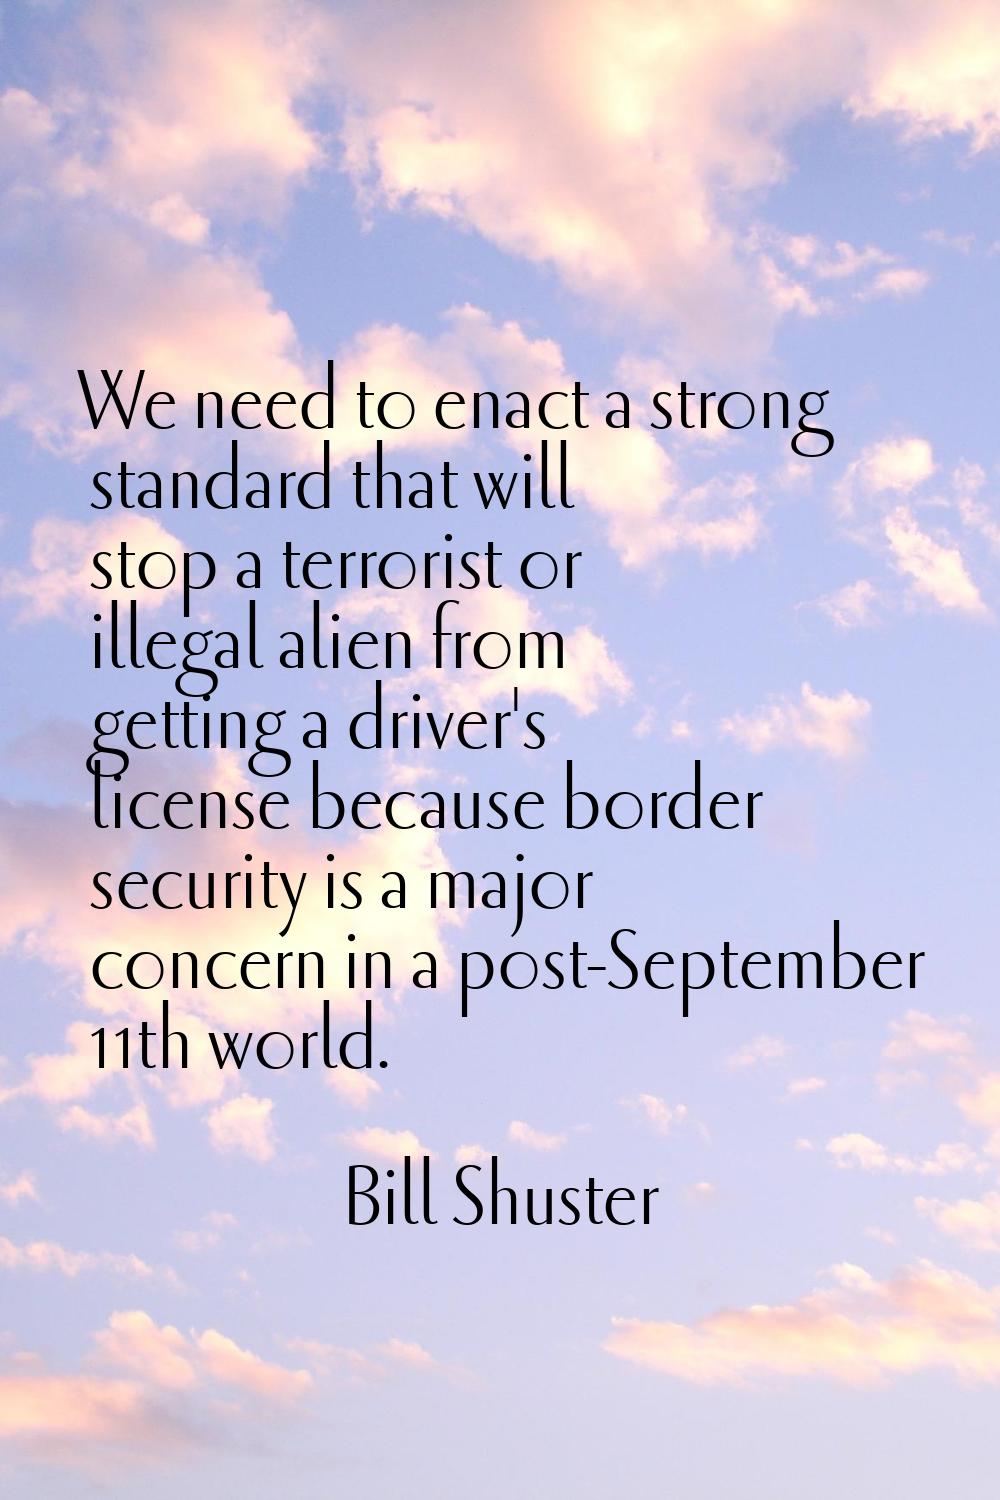 We need to enact a strong standard that will stop a terrorist or illegal alien from getting a drive